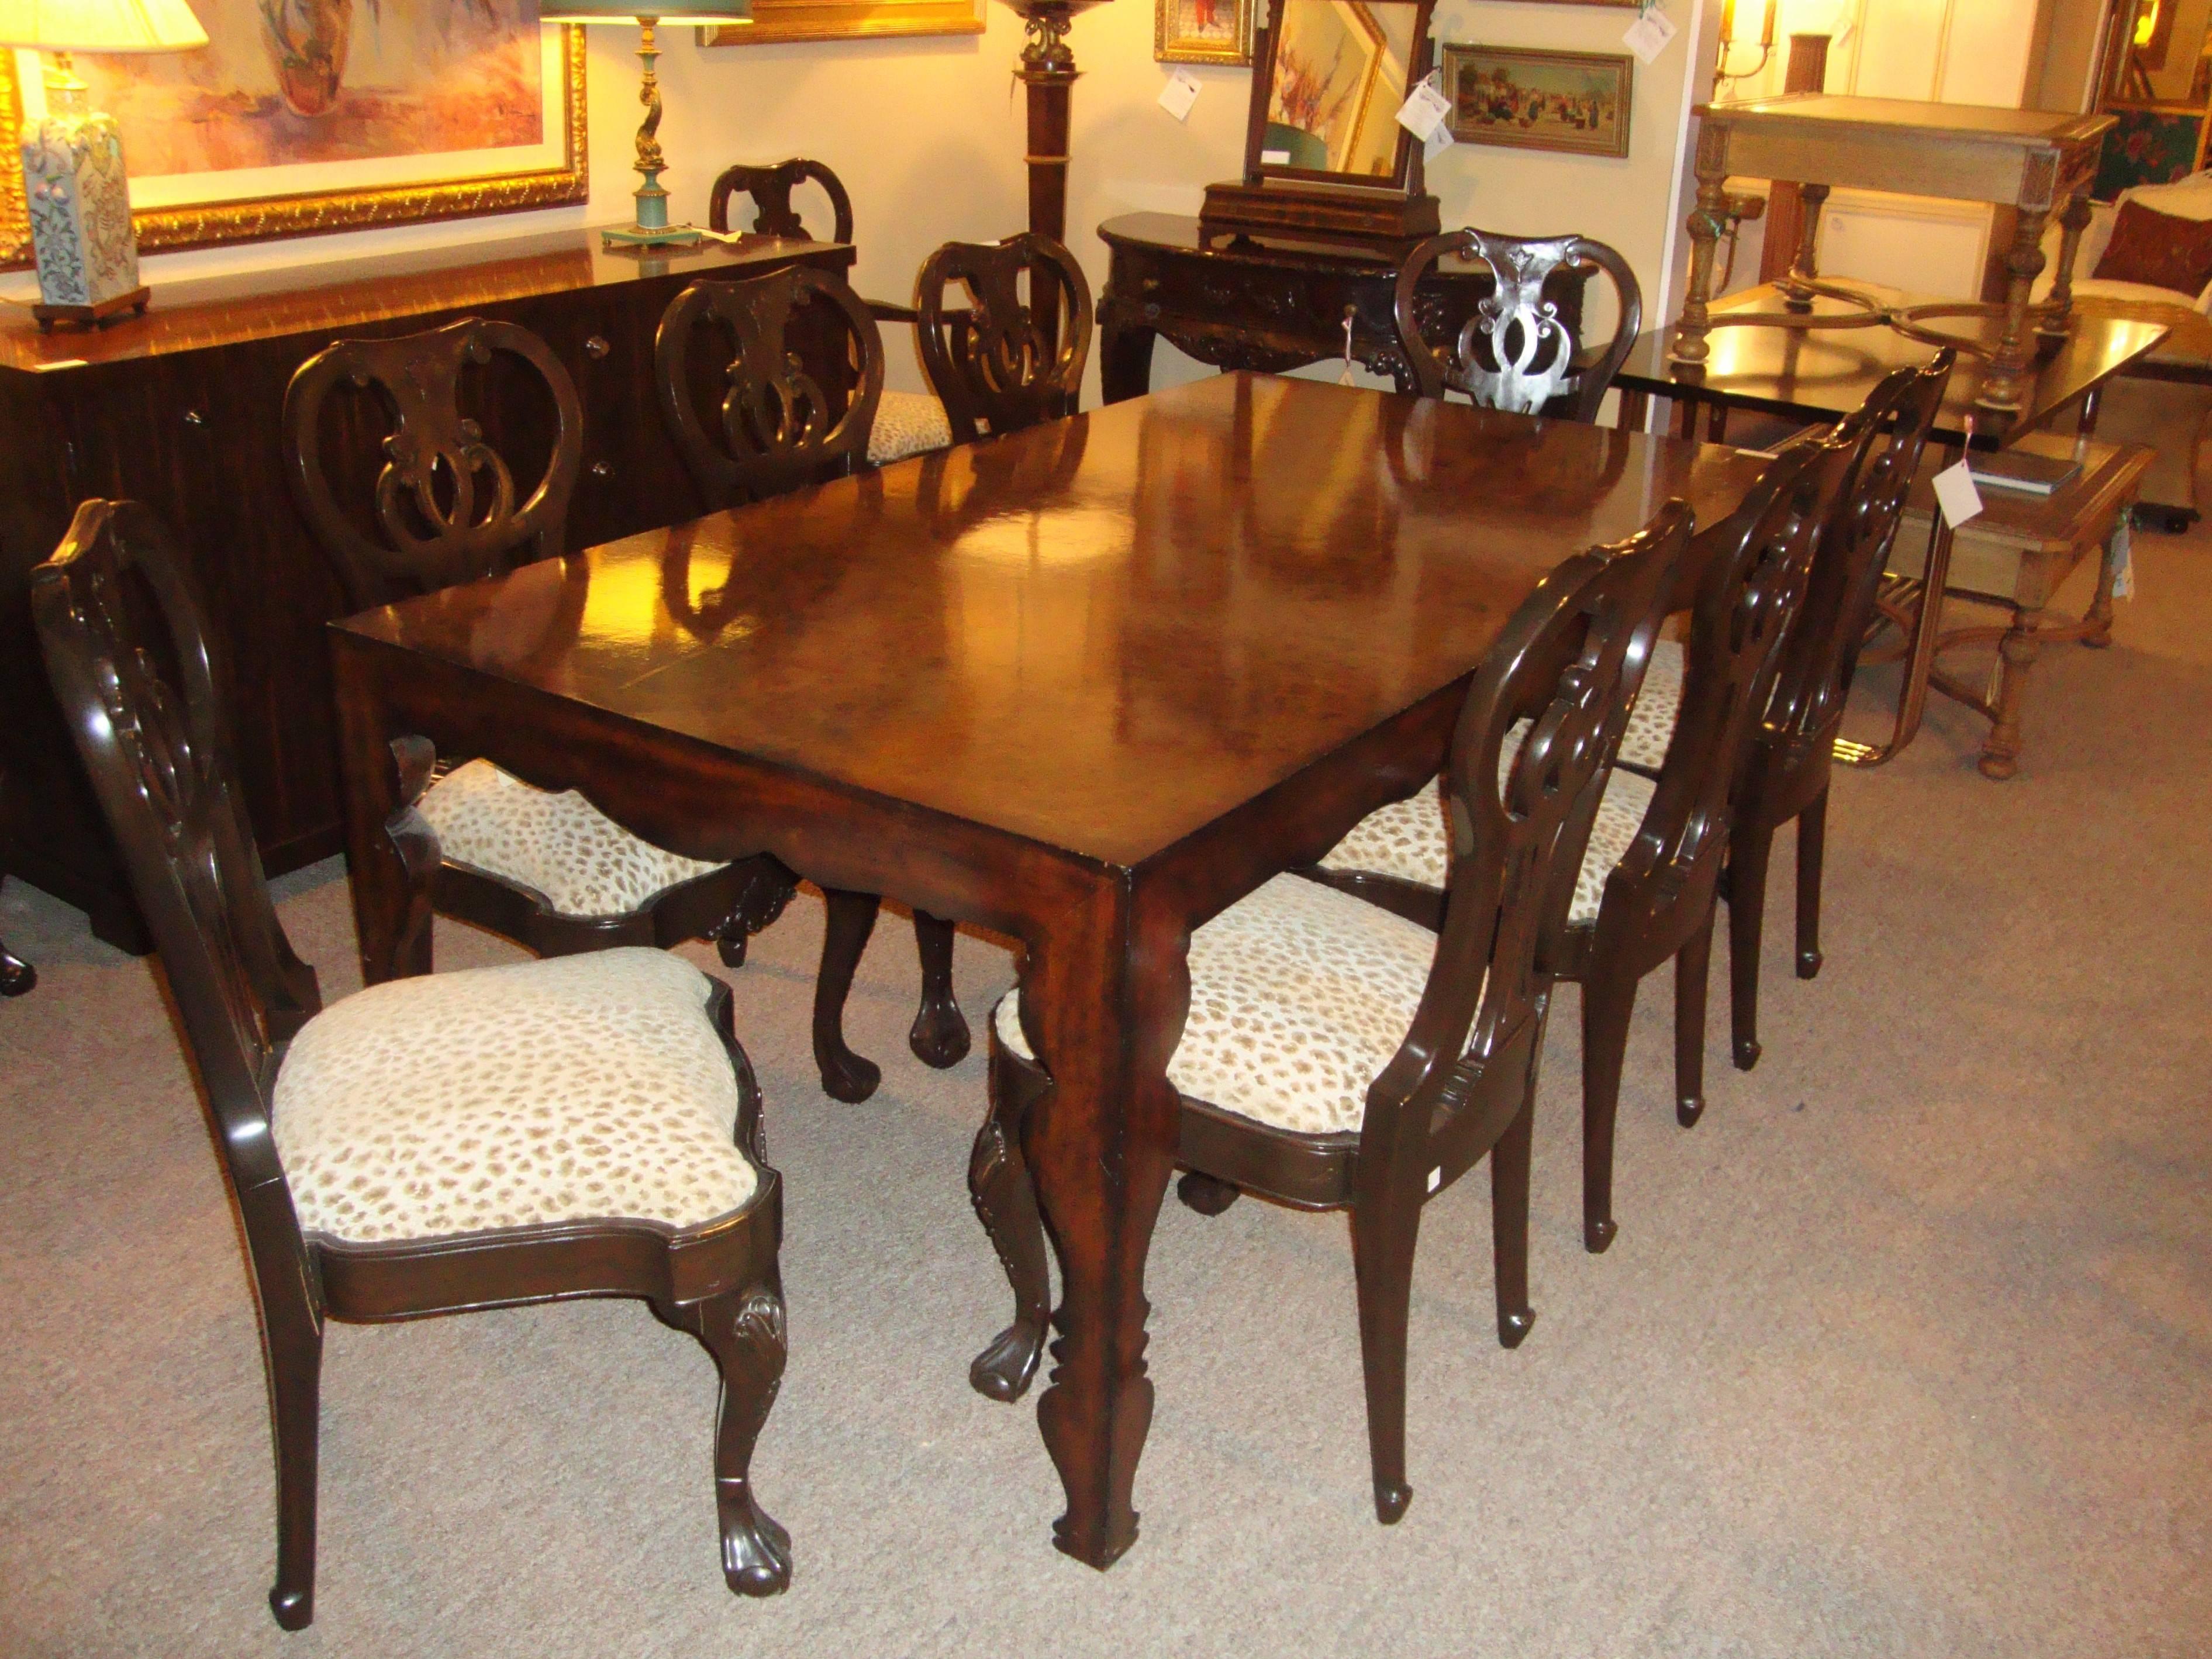 Ralph Lauren dining table dining table by EJ Victor. Finely constructed dining table made by E J Victor for Lauren.